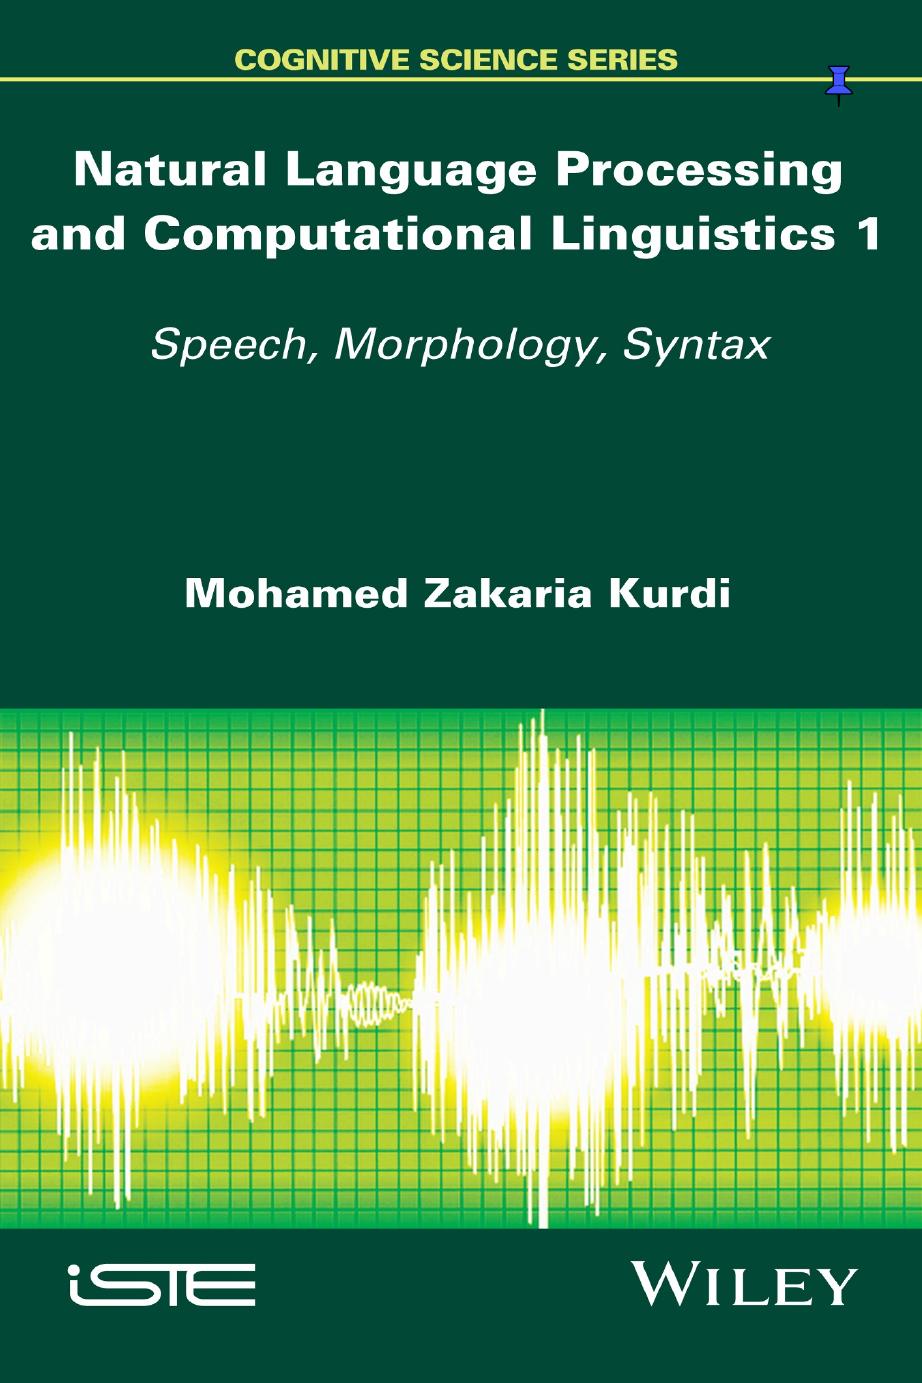 Natural Language Processing and Computational Linguistics: Speech, Morphology and Syntax